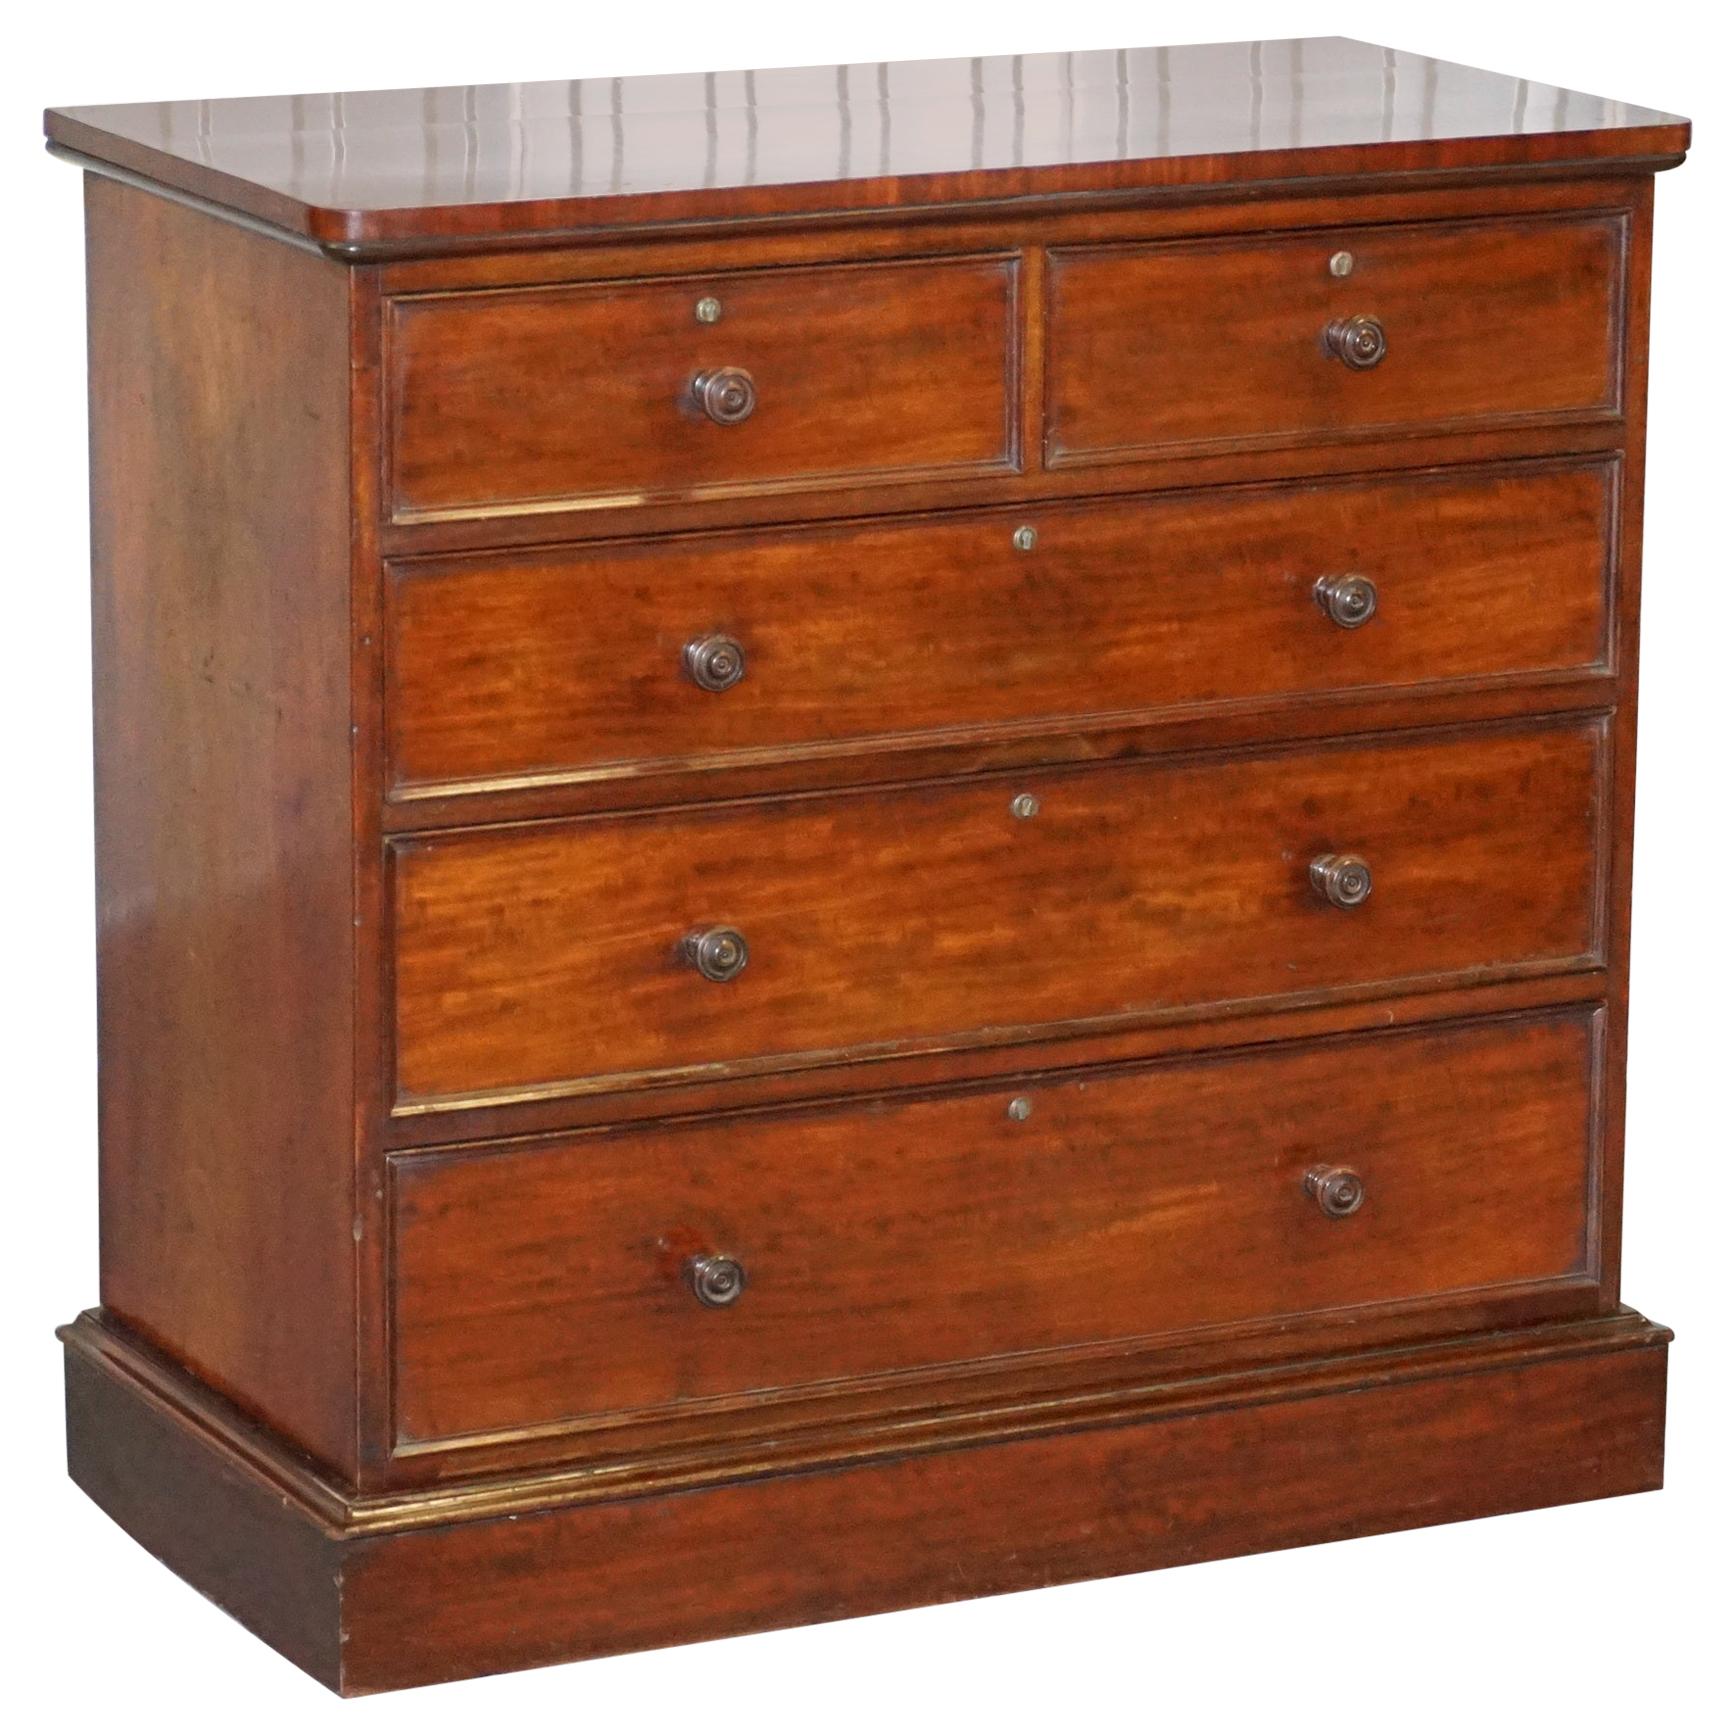 Rare circa 1760 Thomas Wilson 68 Great Queen Street Hardwood Chest of Drawers For Sale